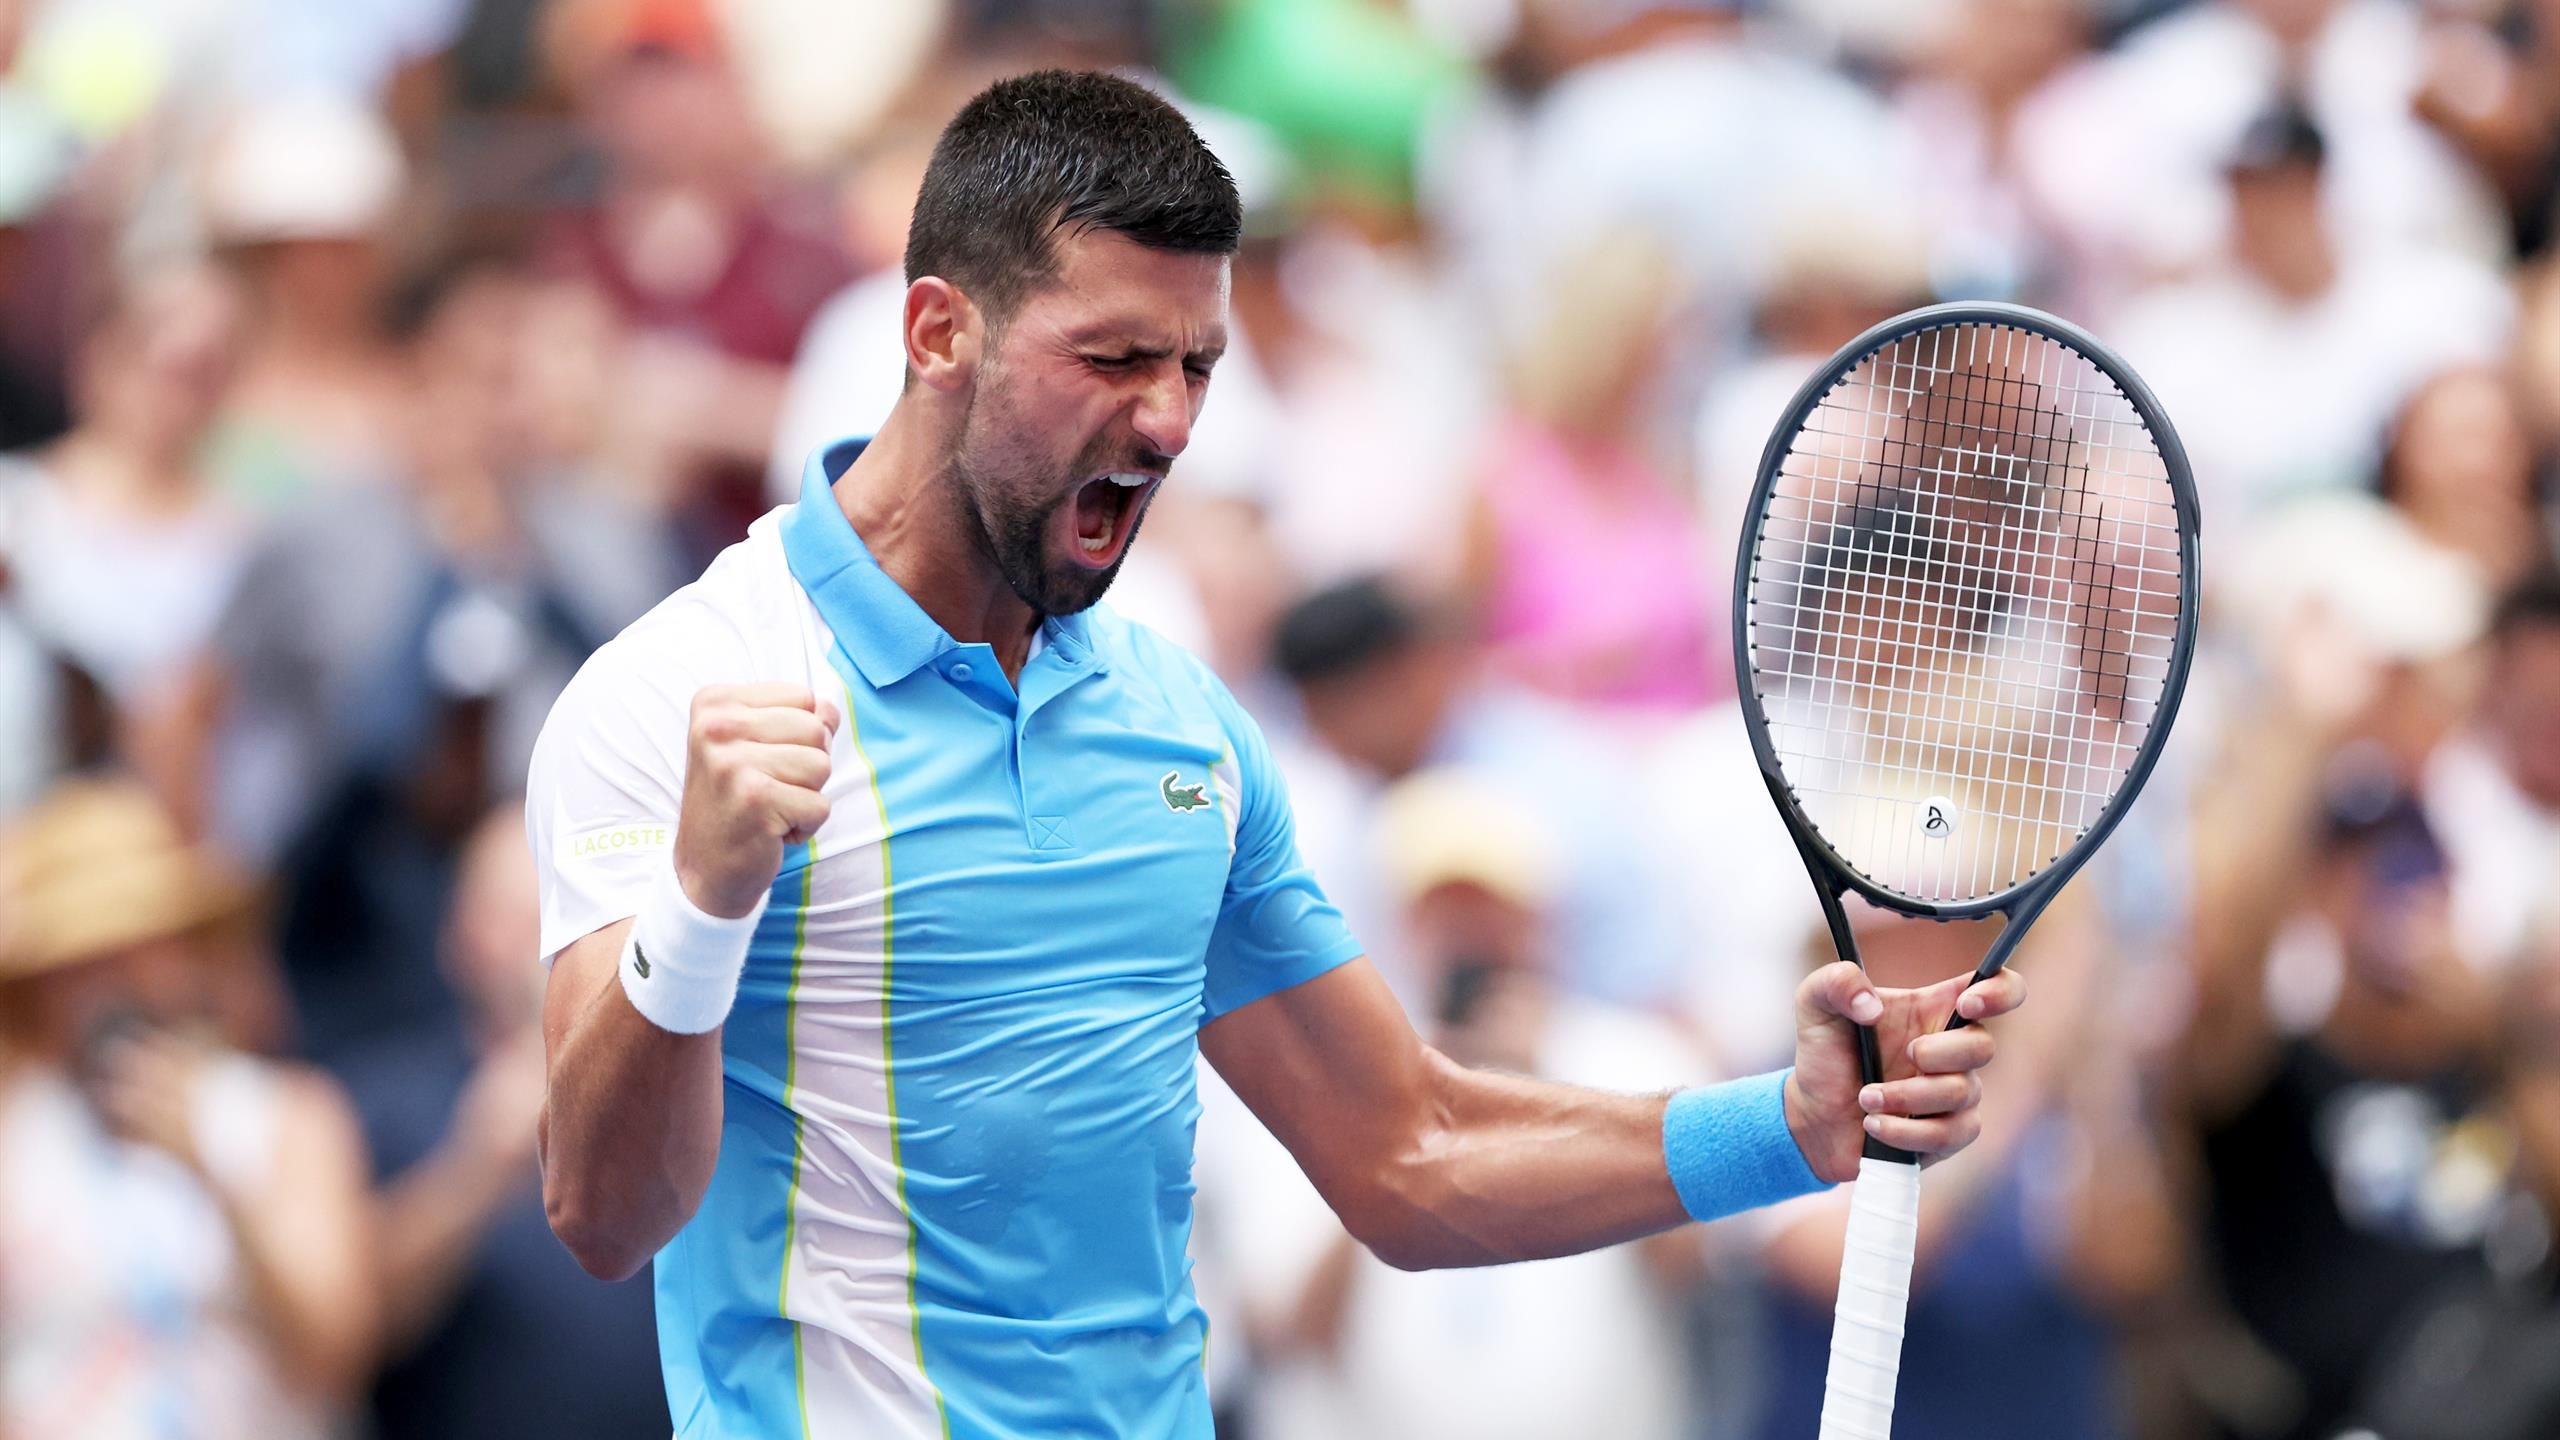 US Open 2023 Day 12 Order of Play and Schedule - When are mens semi-finals? Carlos Alcaraz, Novak Djokovic in action